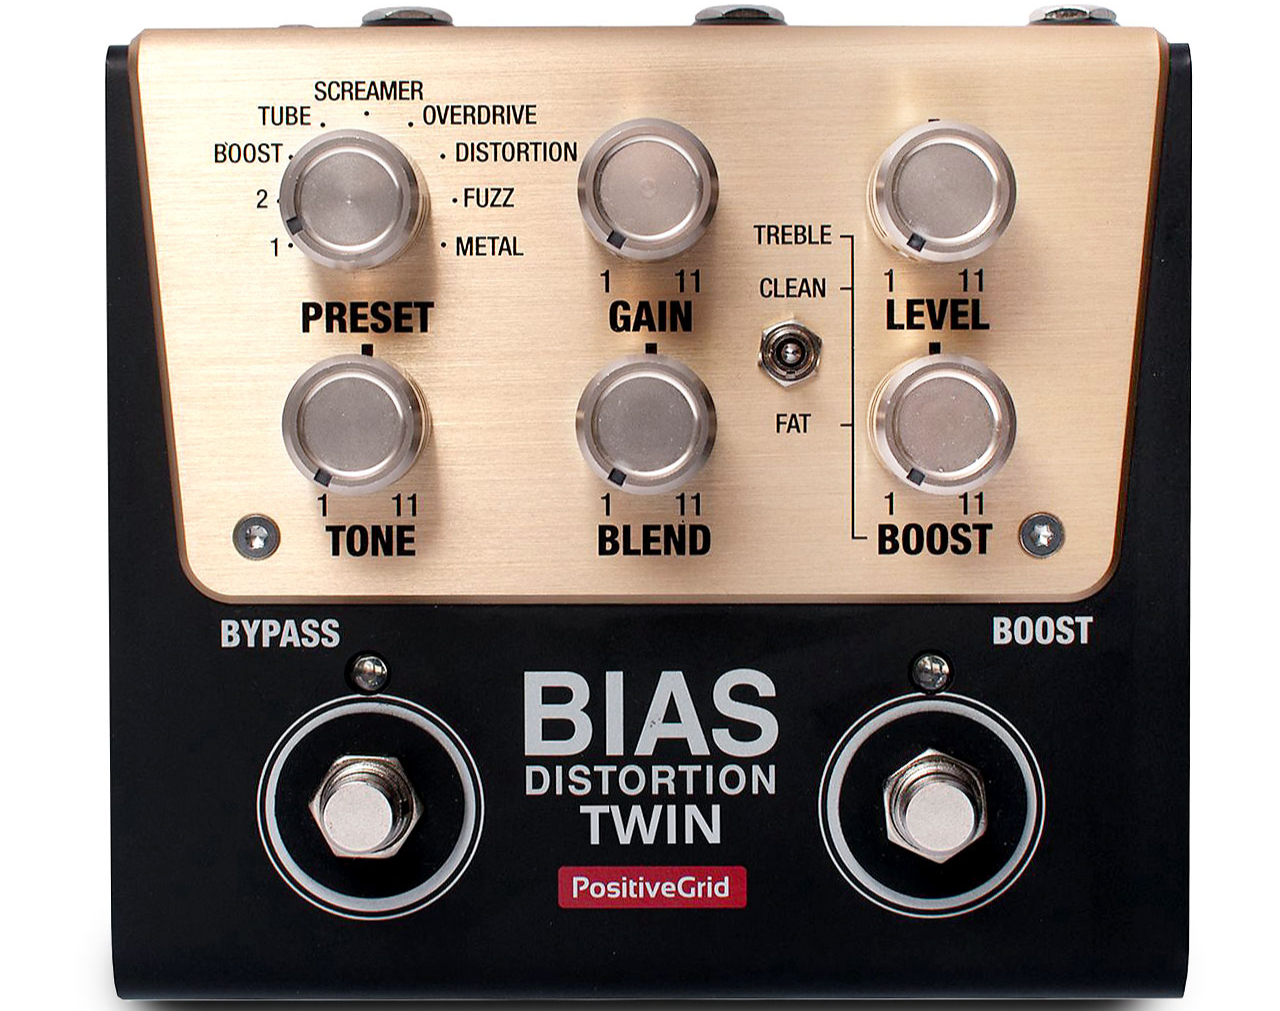 how to positive grid bias professional